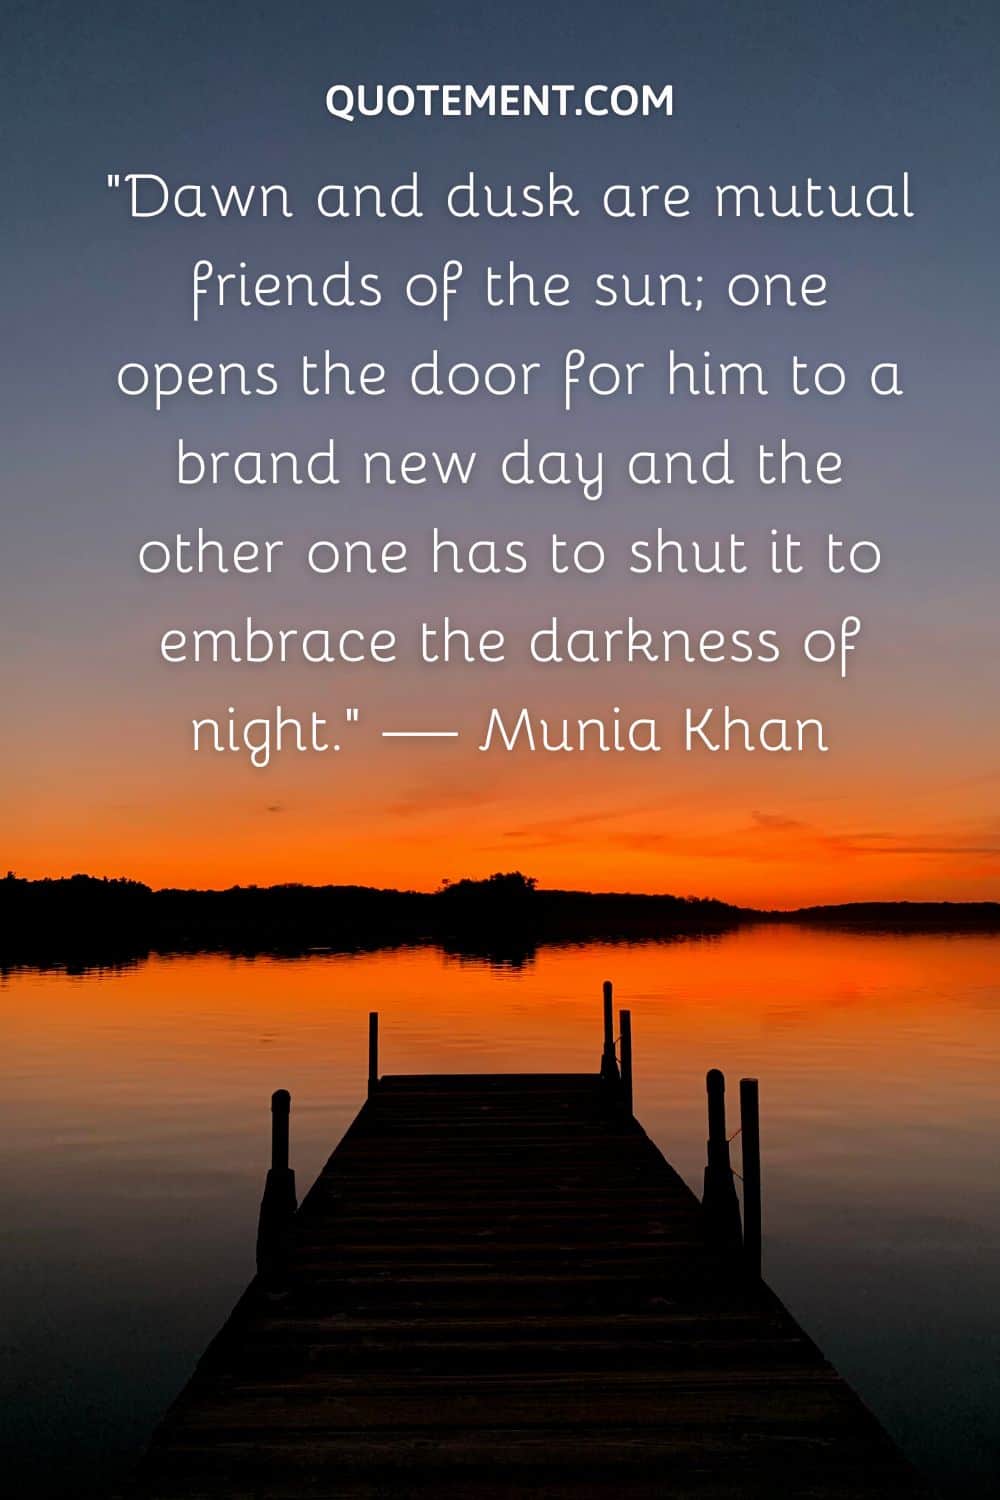 “Dawn and dusk are mutual friends of the sun; one opens the door for him to a brand new day and the other one has to shut it to embrace the darkness of night.” — Munia Khan